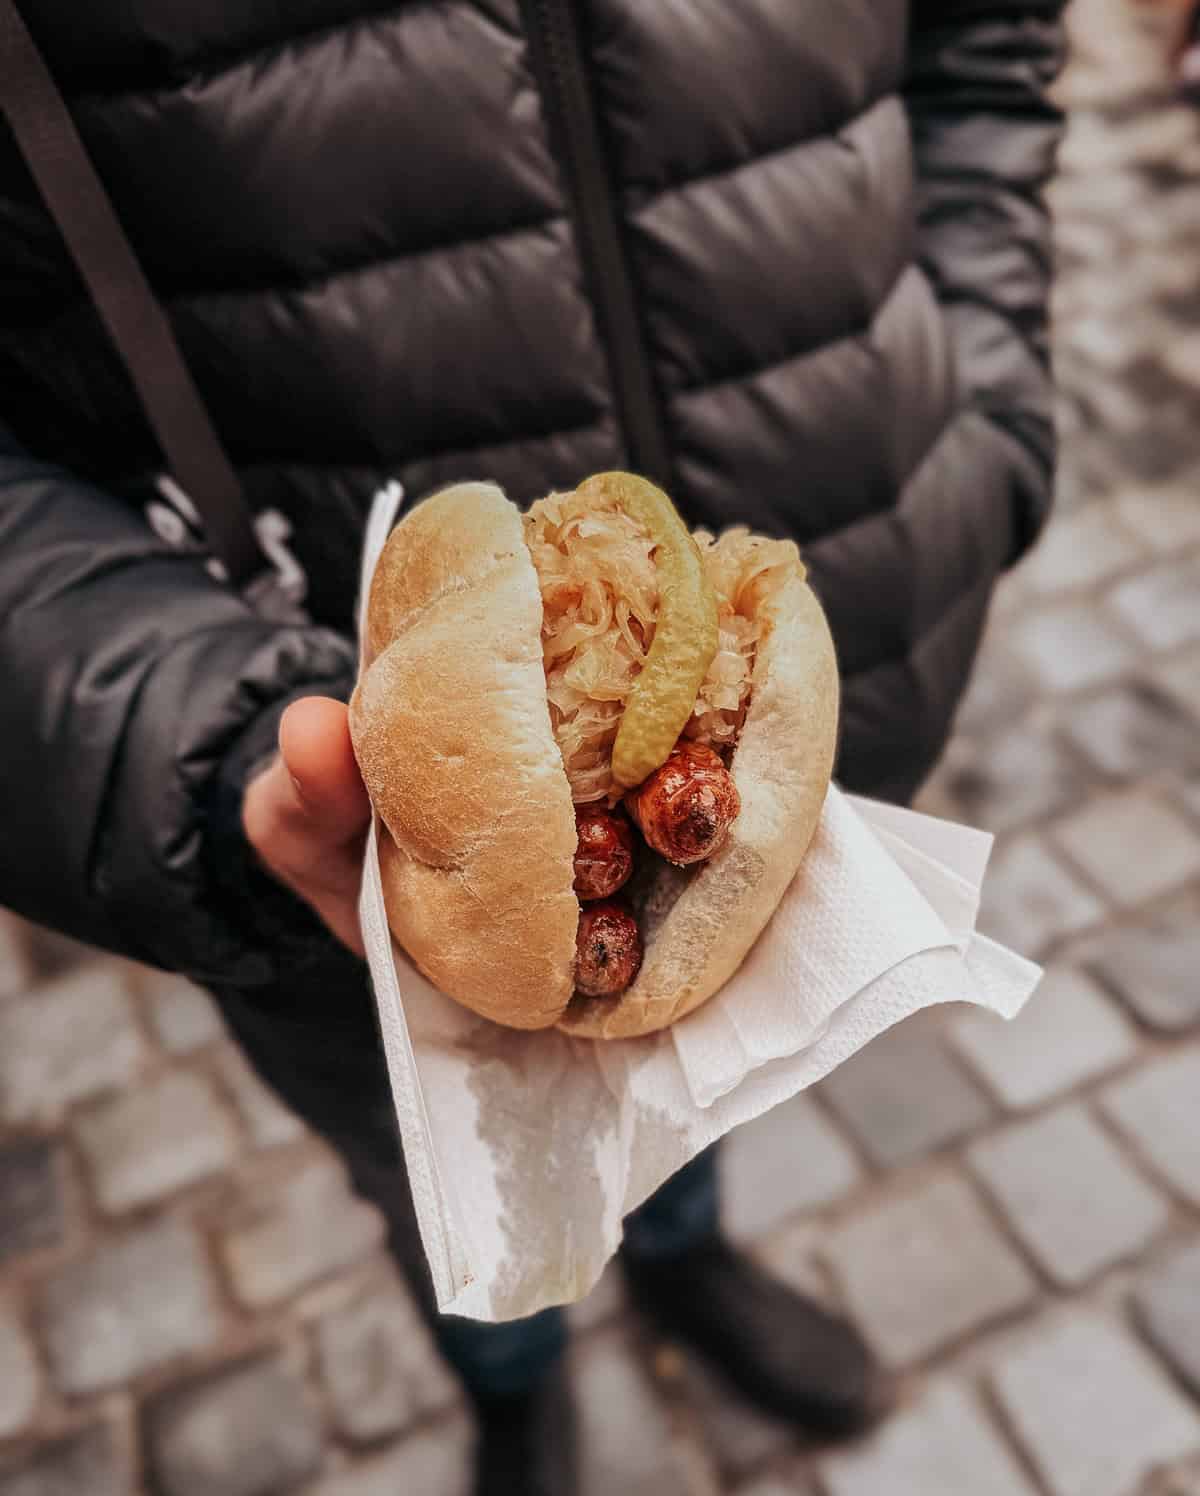 A person holding a Nuremberg sausage sandwich filled with small grilled sausages and sauerkraut, topped with mustard, in a crusty white bun.